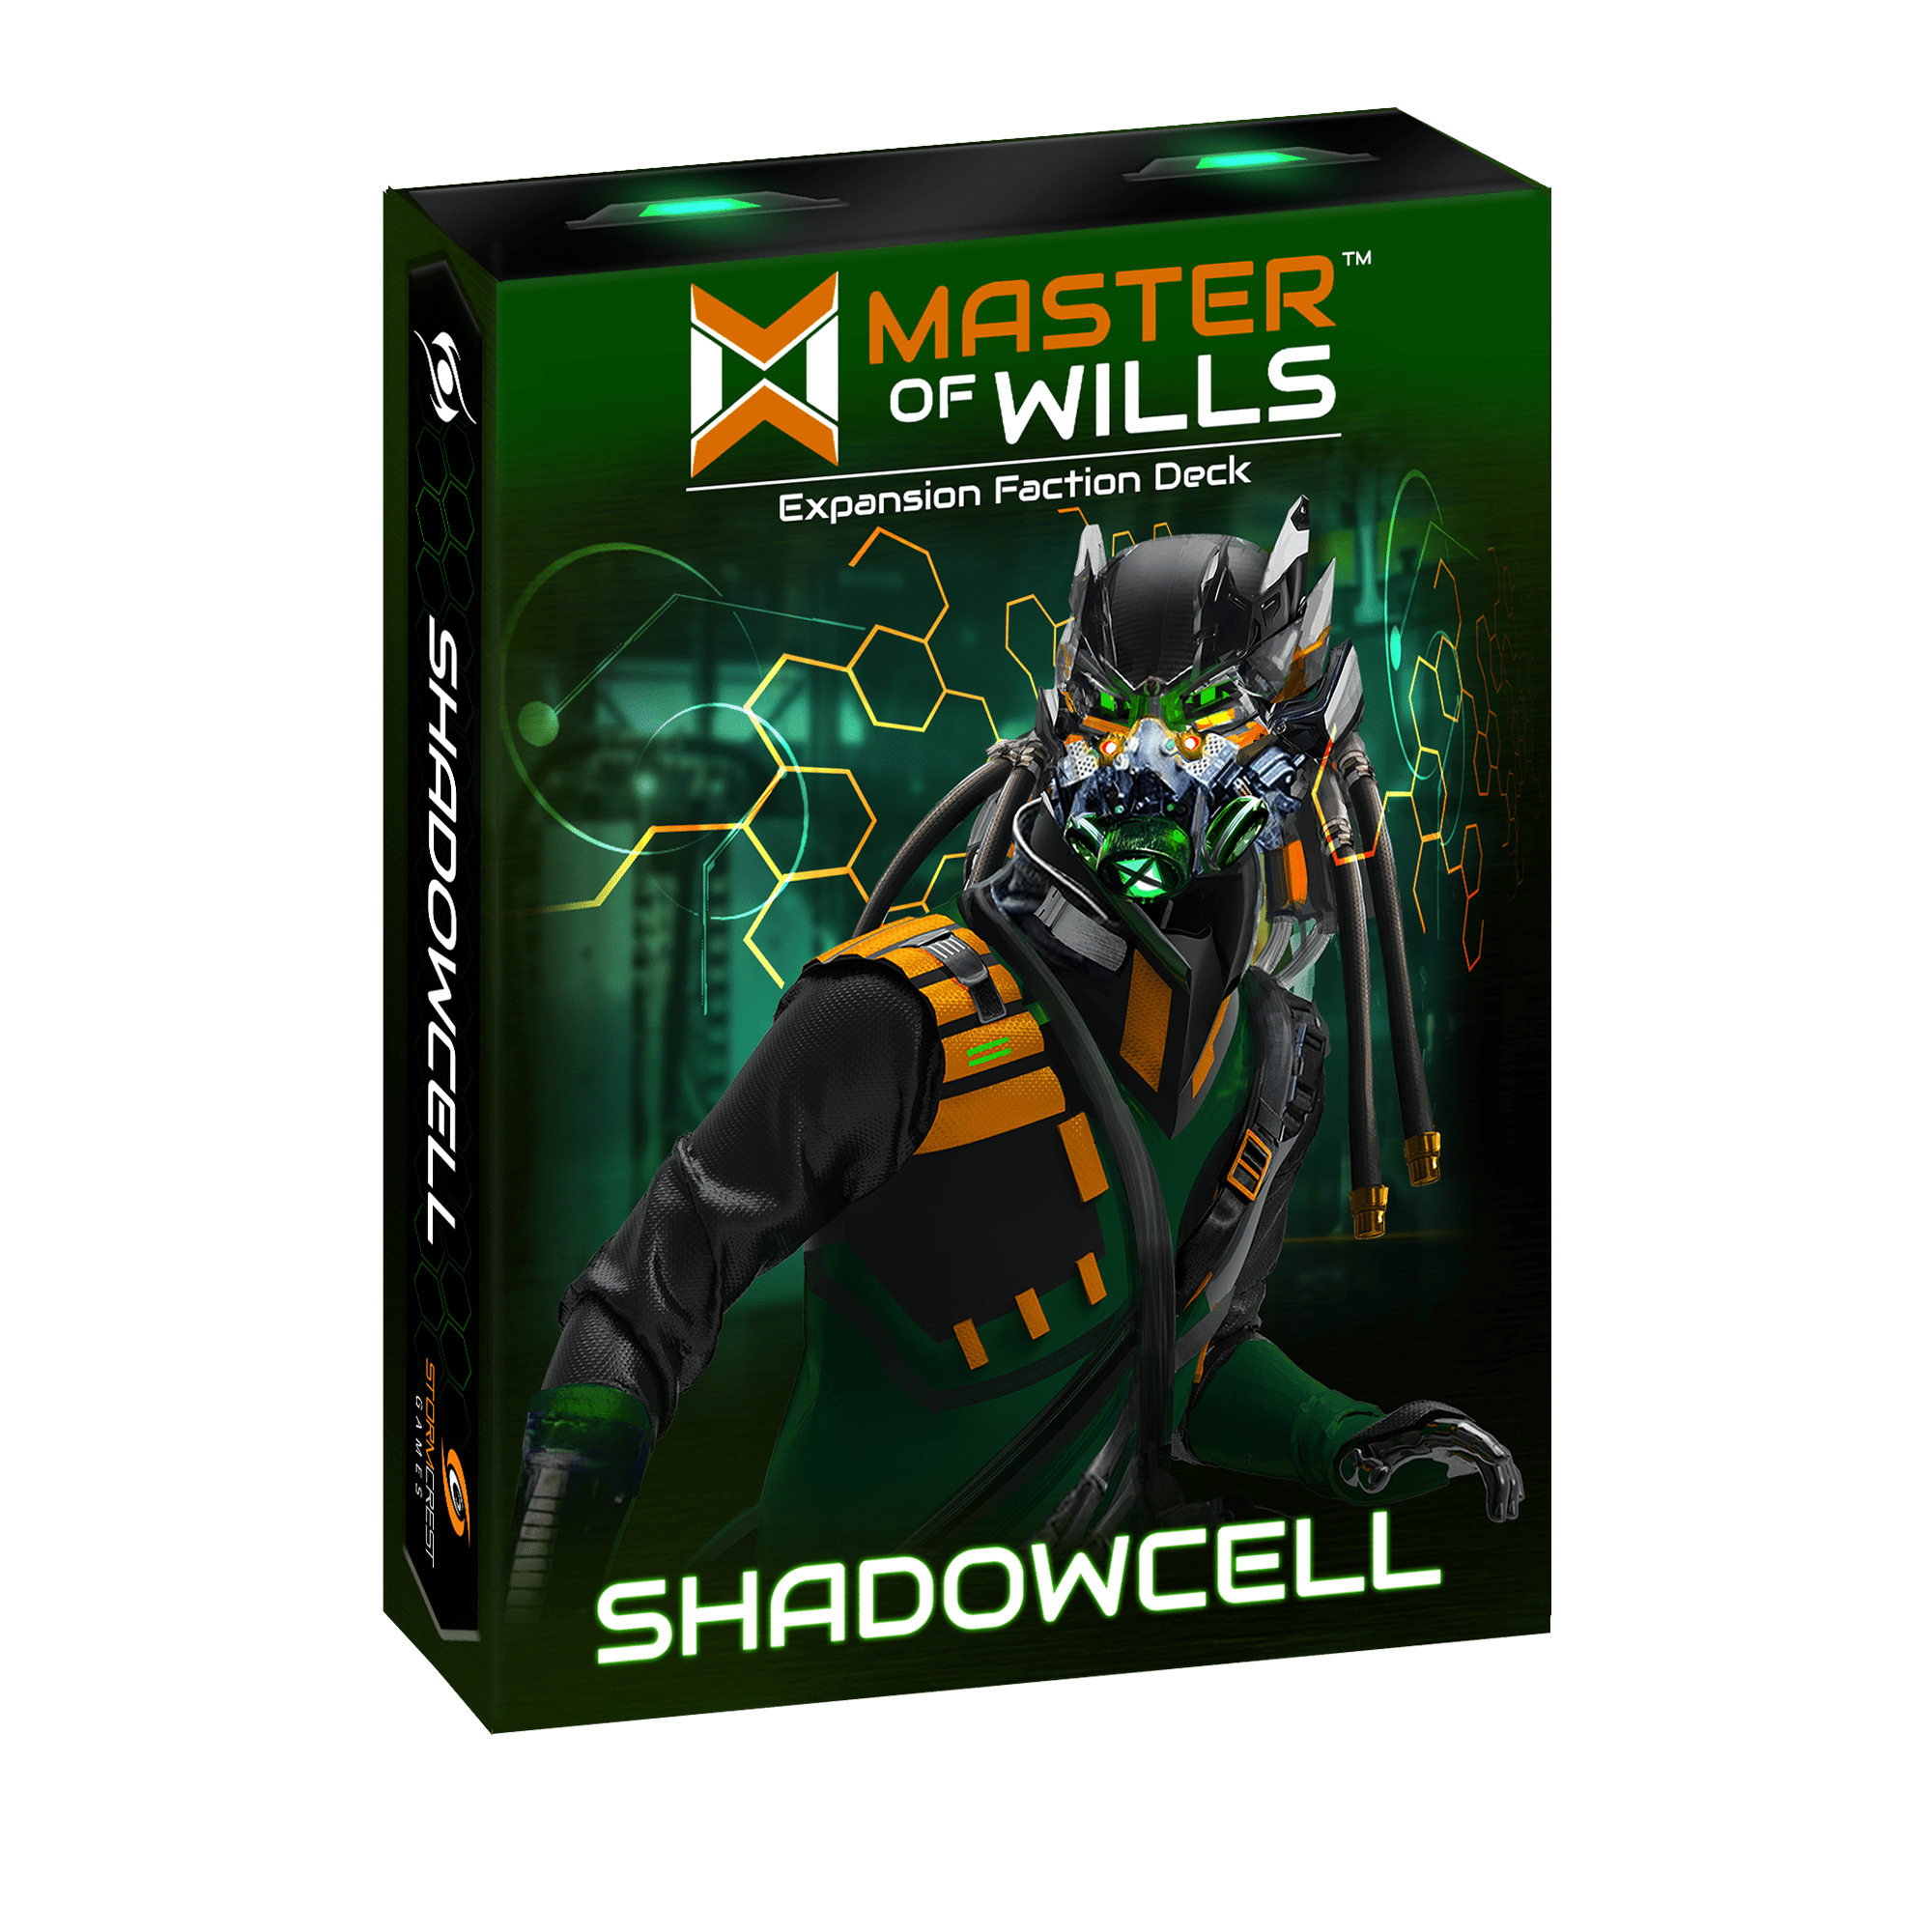 Masters of Wills: Shadowcell Expansion Faction Deck